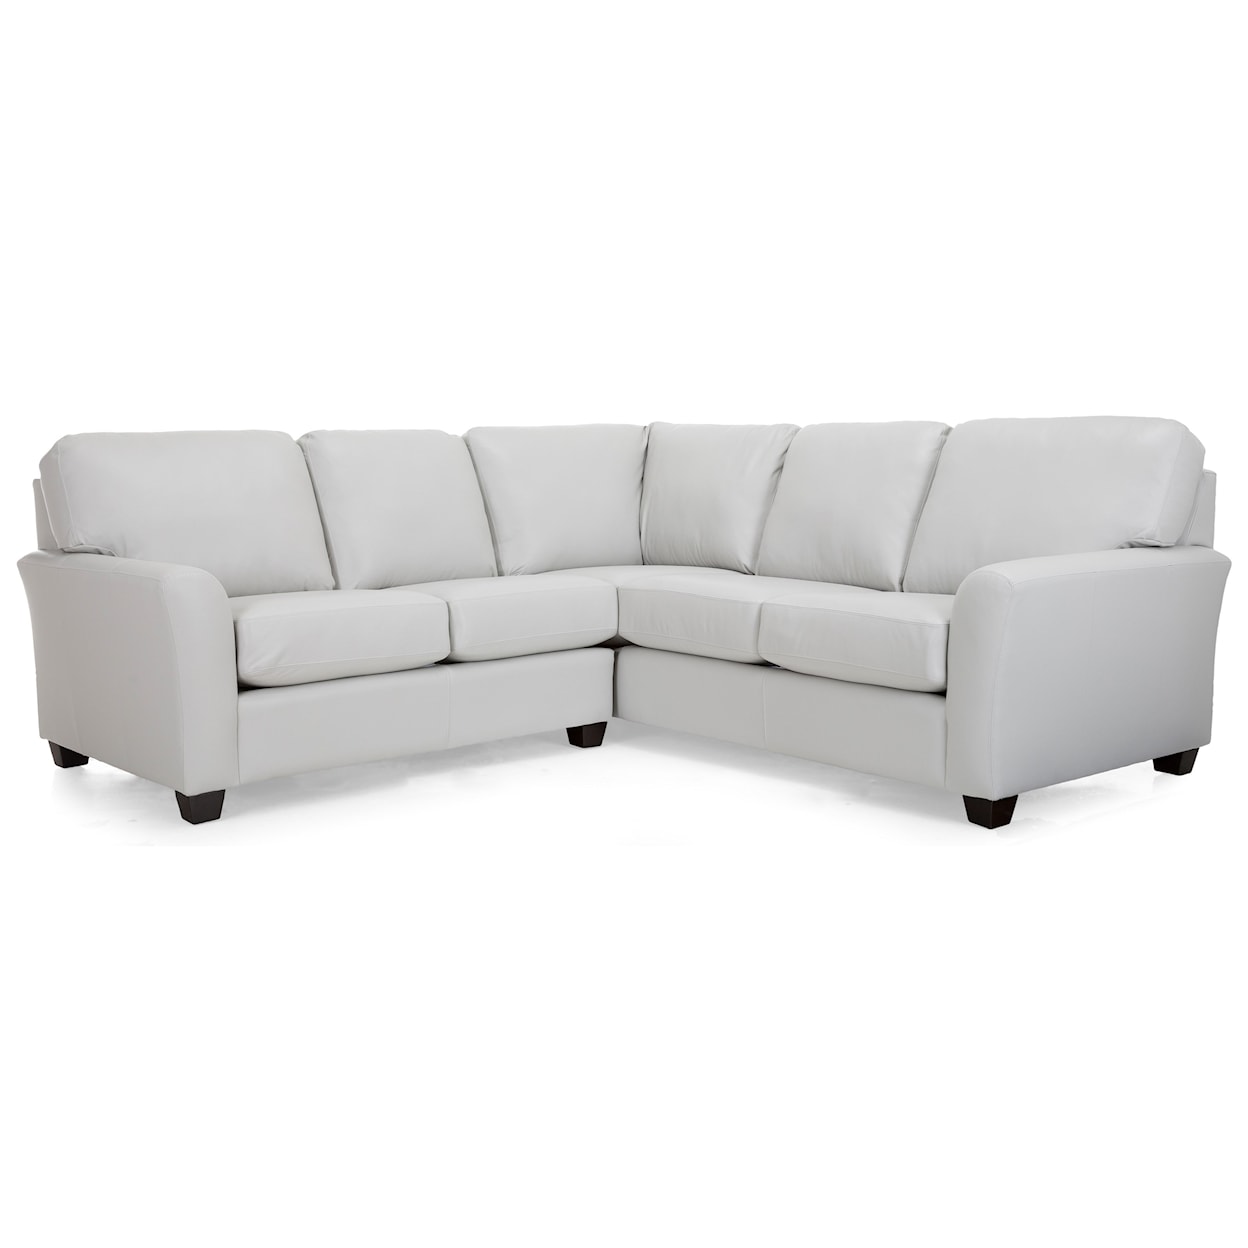 Decor-Rest Alessandra Connections Sectional Sofa